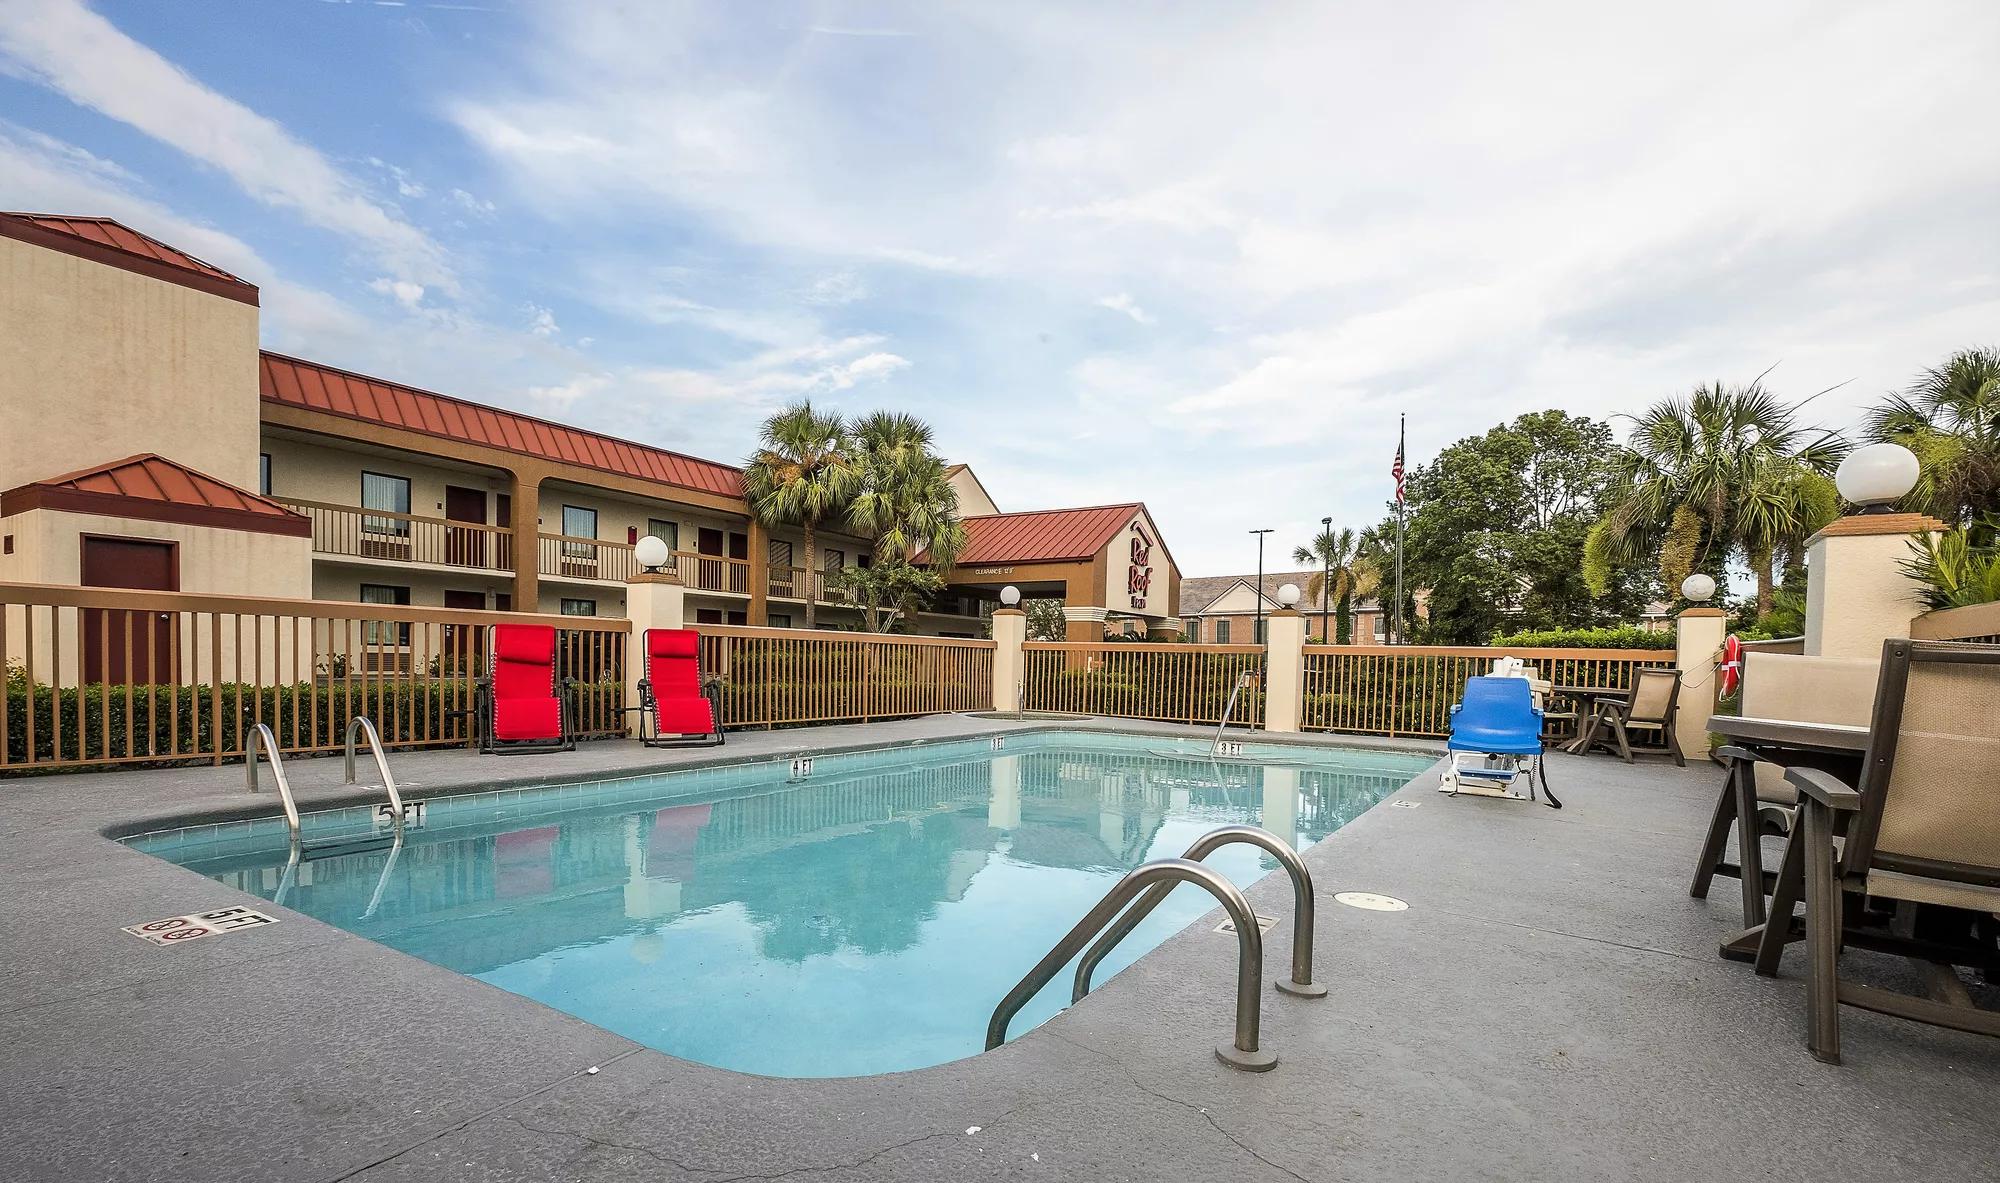 Red Roof Inn Kingsland Outdoor Swimming Pool Image